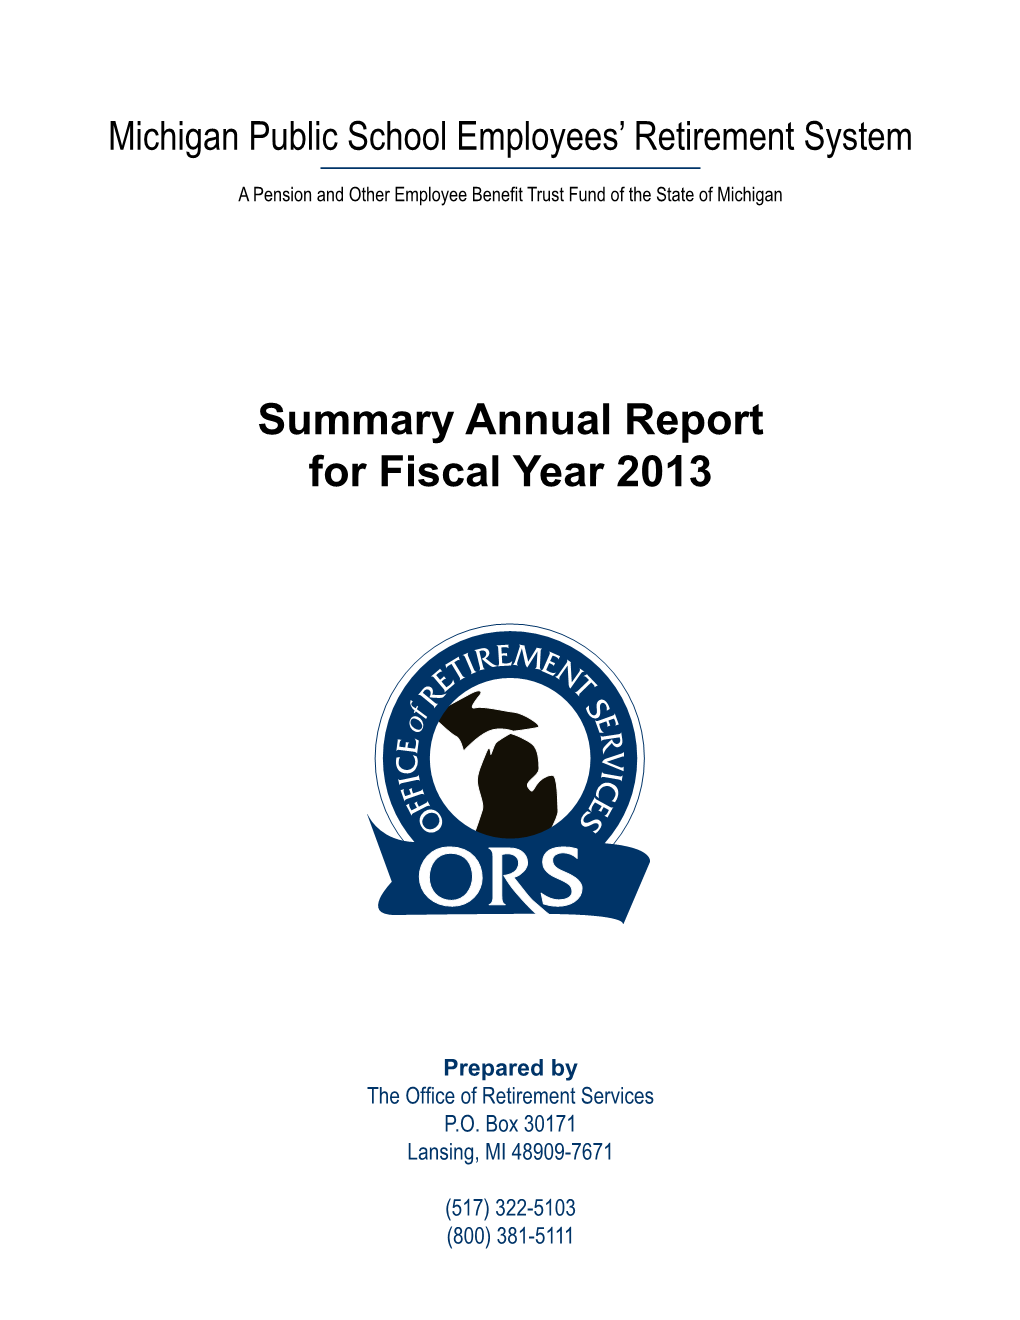 Summary Annual Report for Fiscal Year 2013